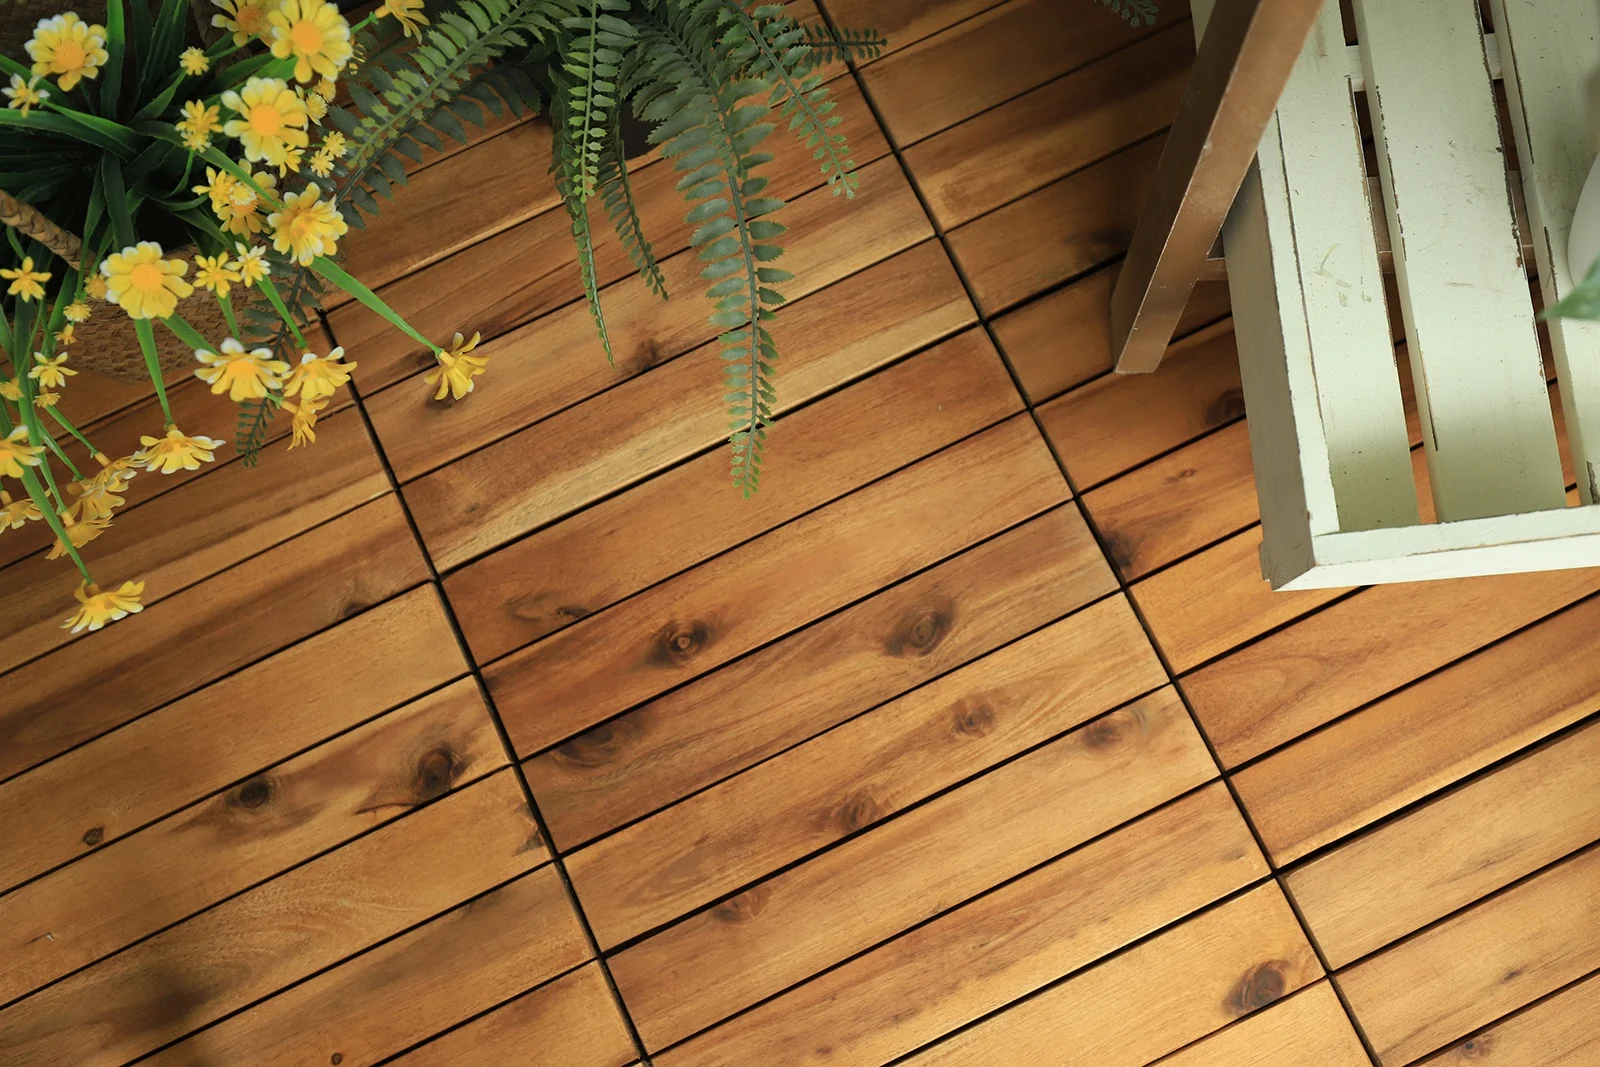 Bamboo outdoor decking tile with PE base-BB5P3030PH